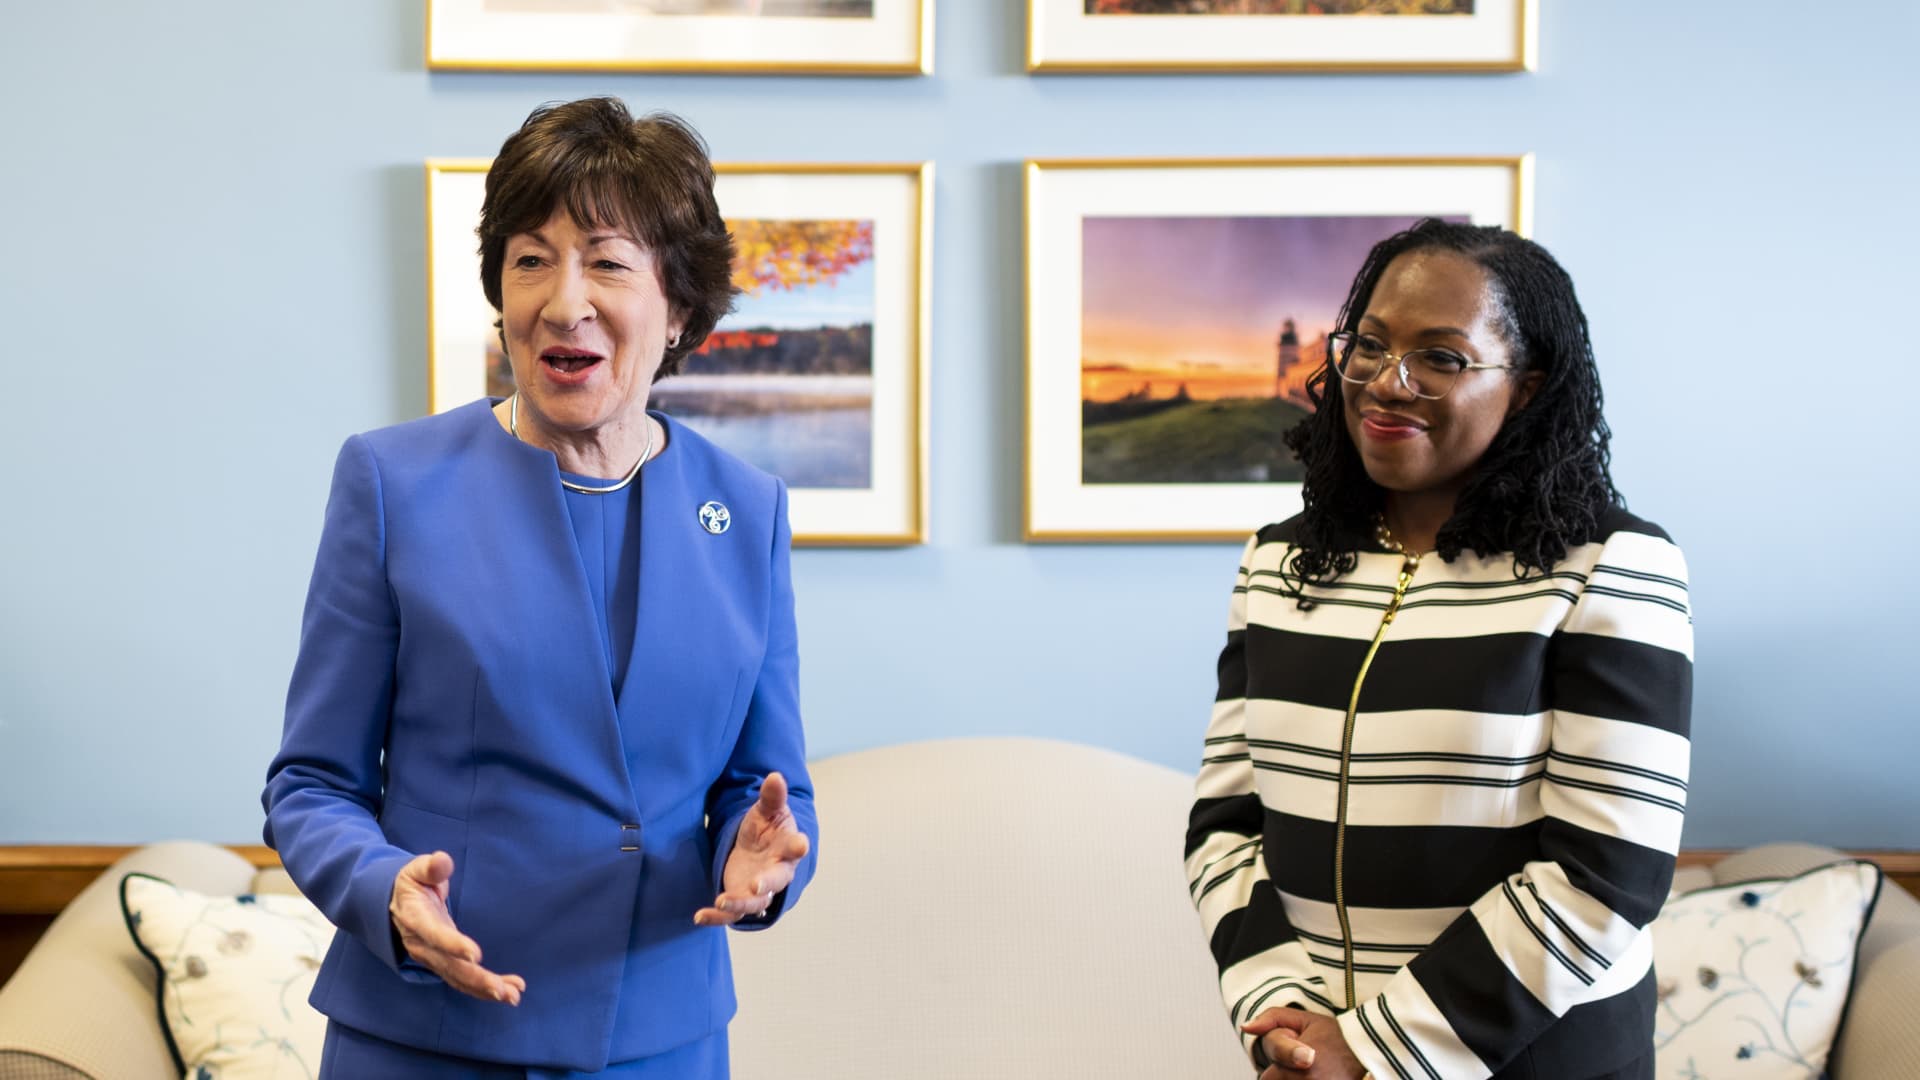 GOP Sen. Susan Collins says she will vote for Biden Supreme Court pick Ketanji Brown Jackson, giving her likely confirmation bipartisan support